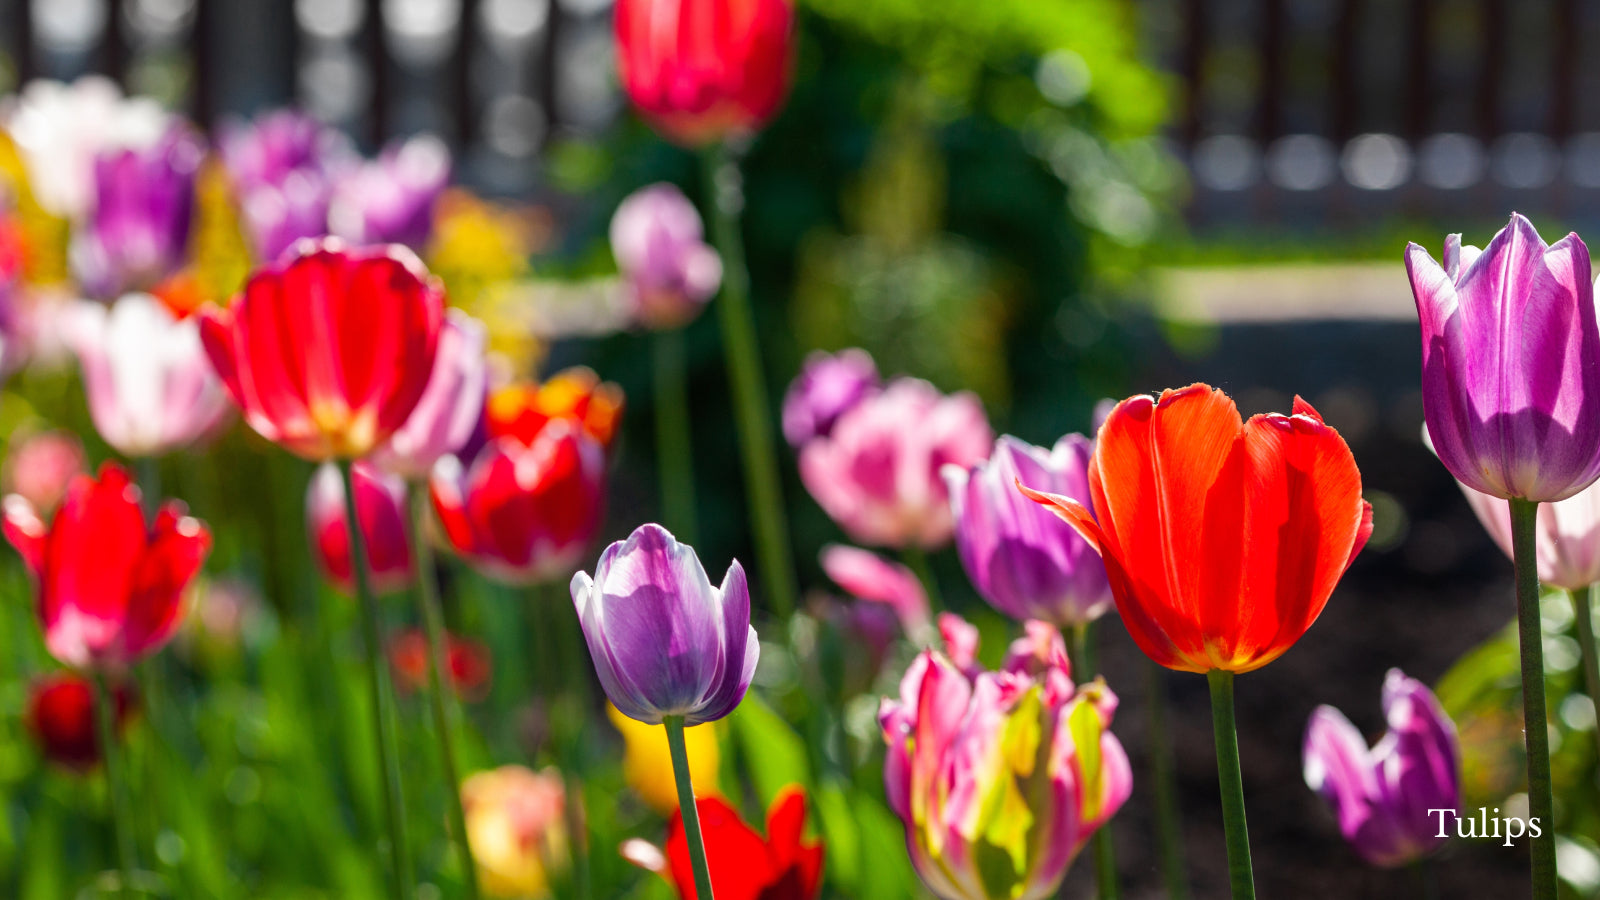 Multicolored tulips growing outside